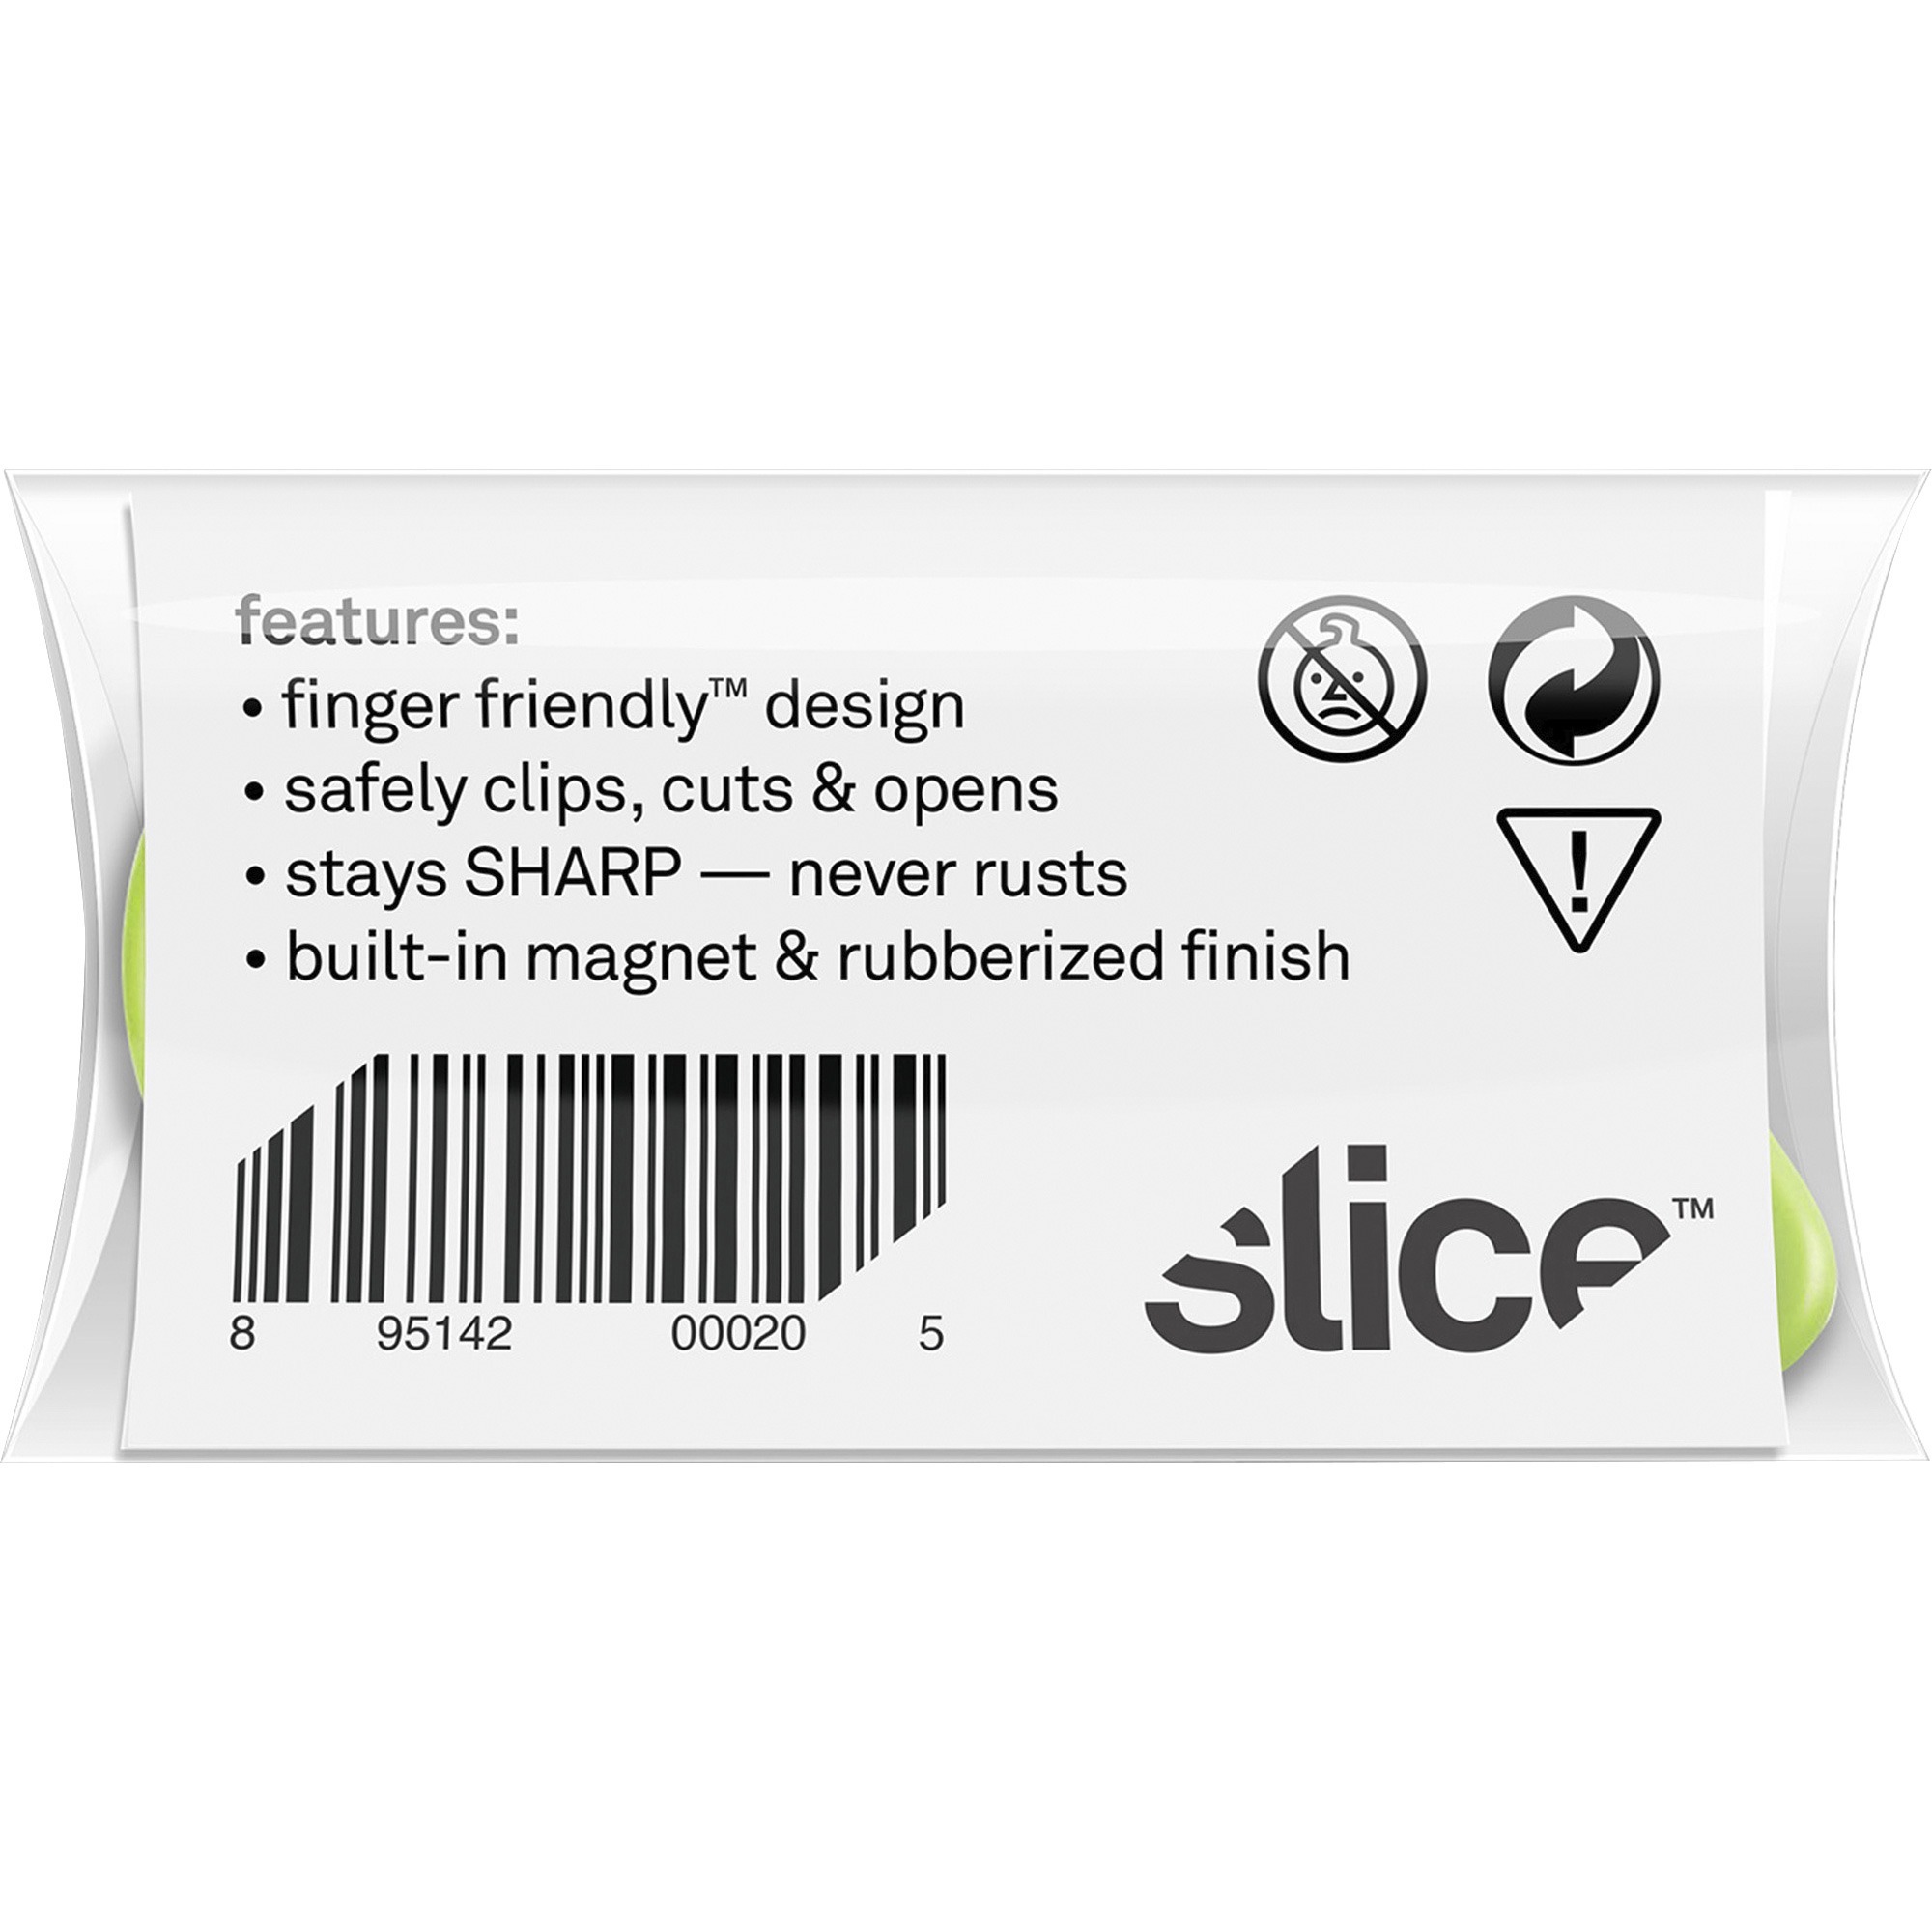 slice-mini-safety-cutter-packaging